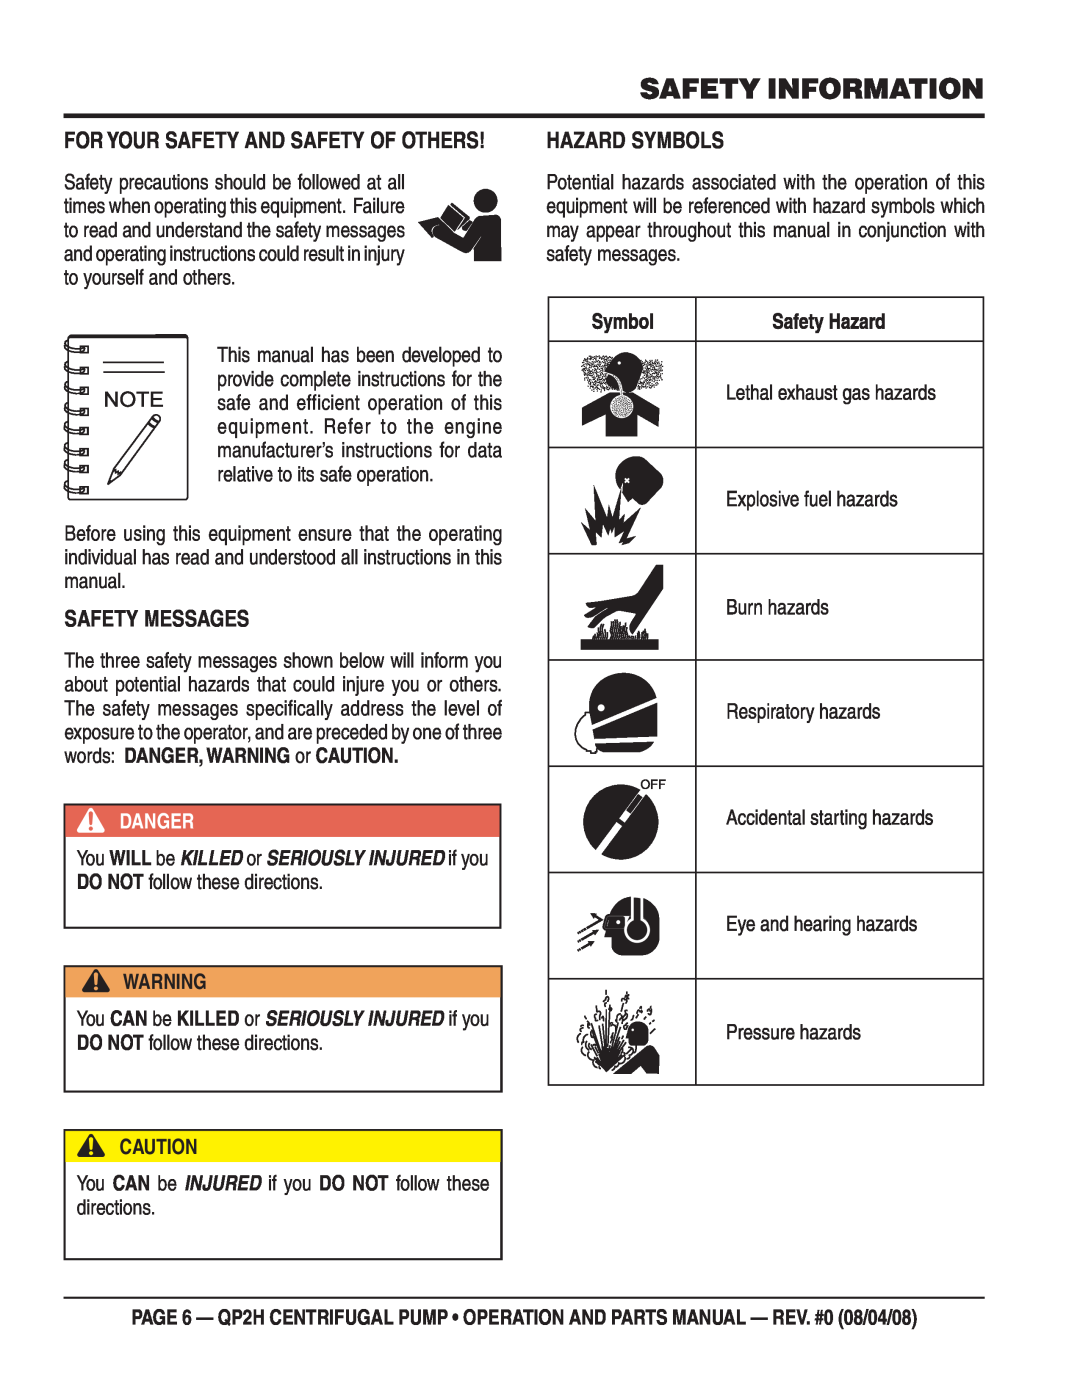 Multiquip QP2H manual Safety Information, Safety Messages, Hazard Symbols, For Your Safety And Safety Of Others, Danger 